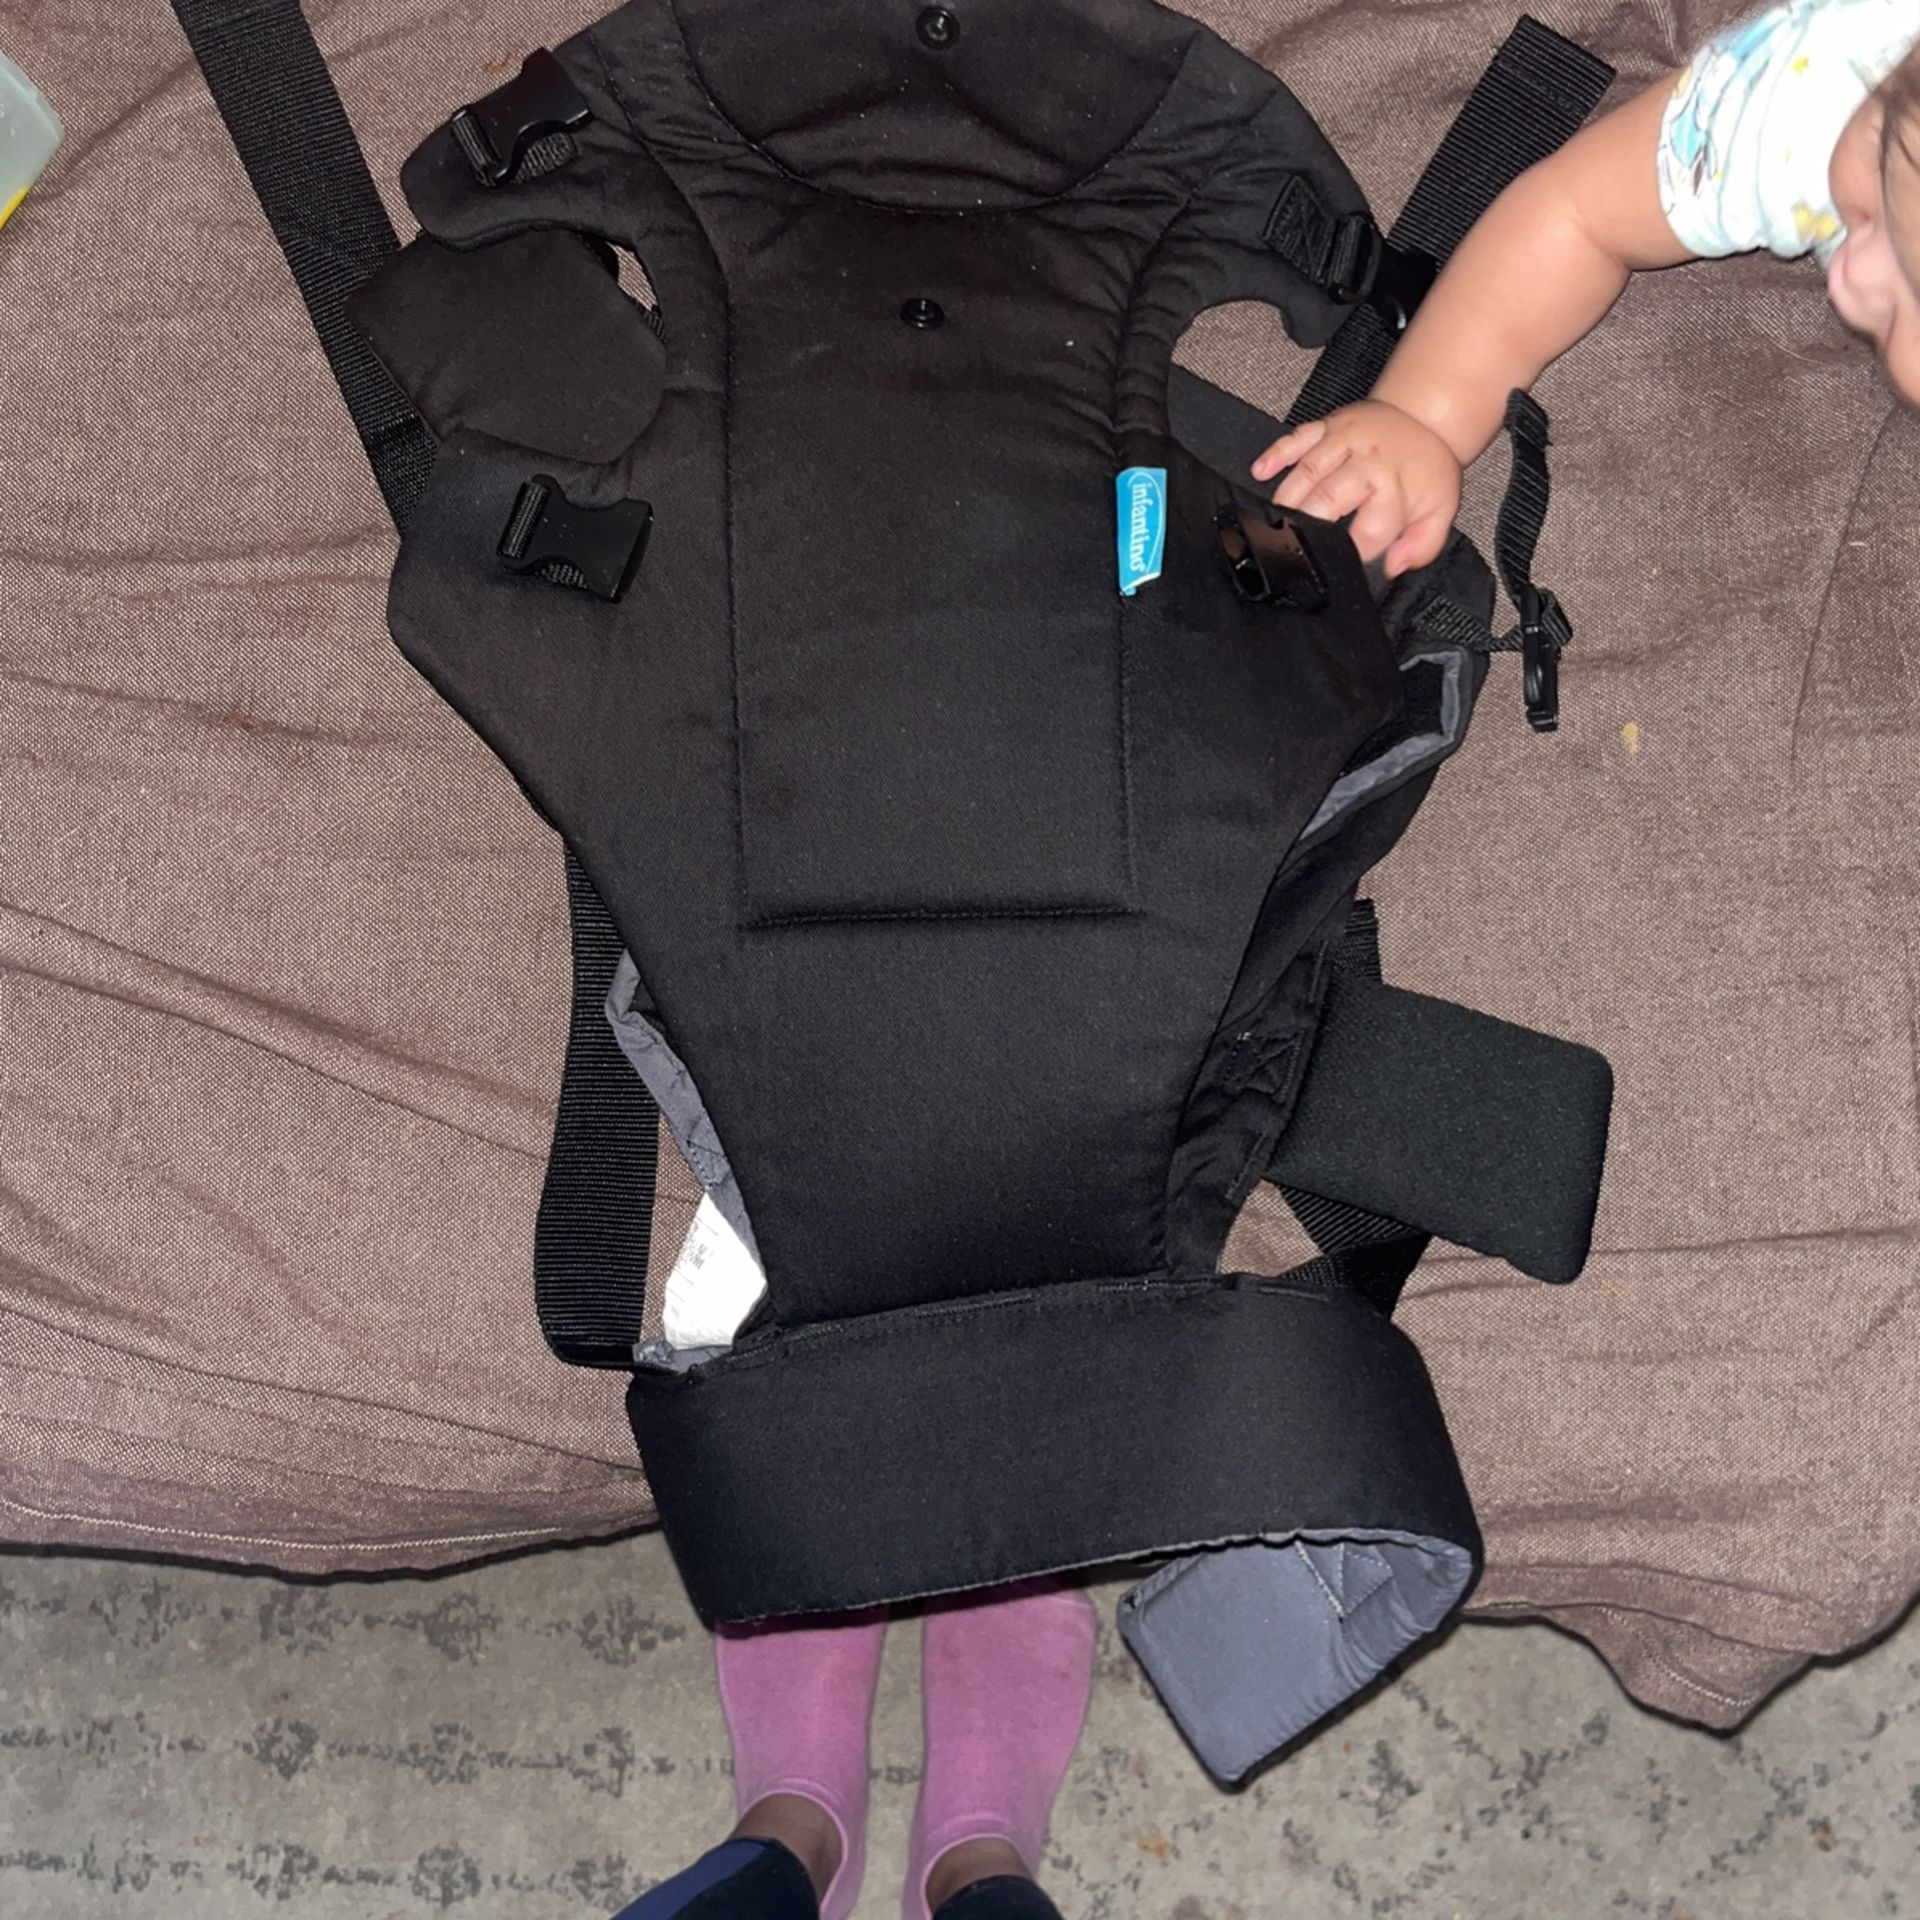 Infant Baby Carrier